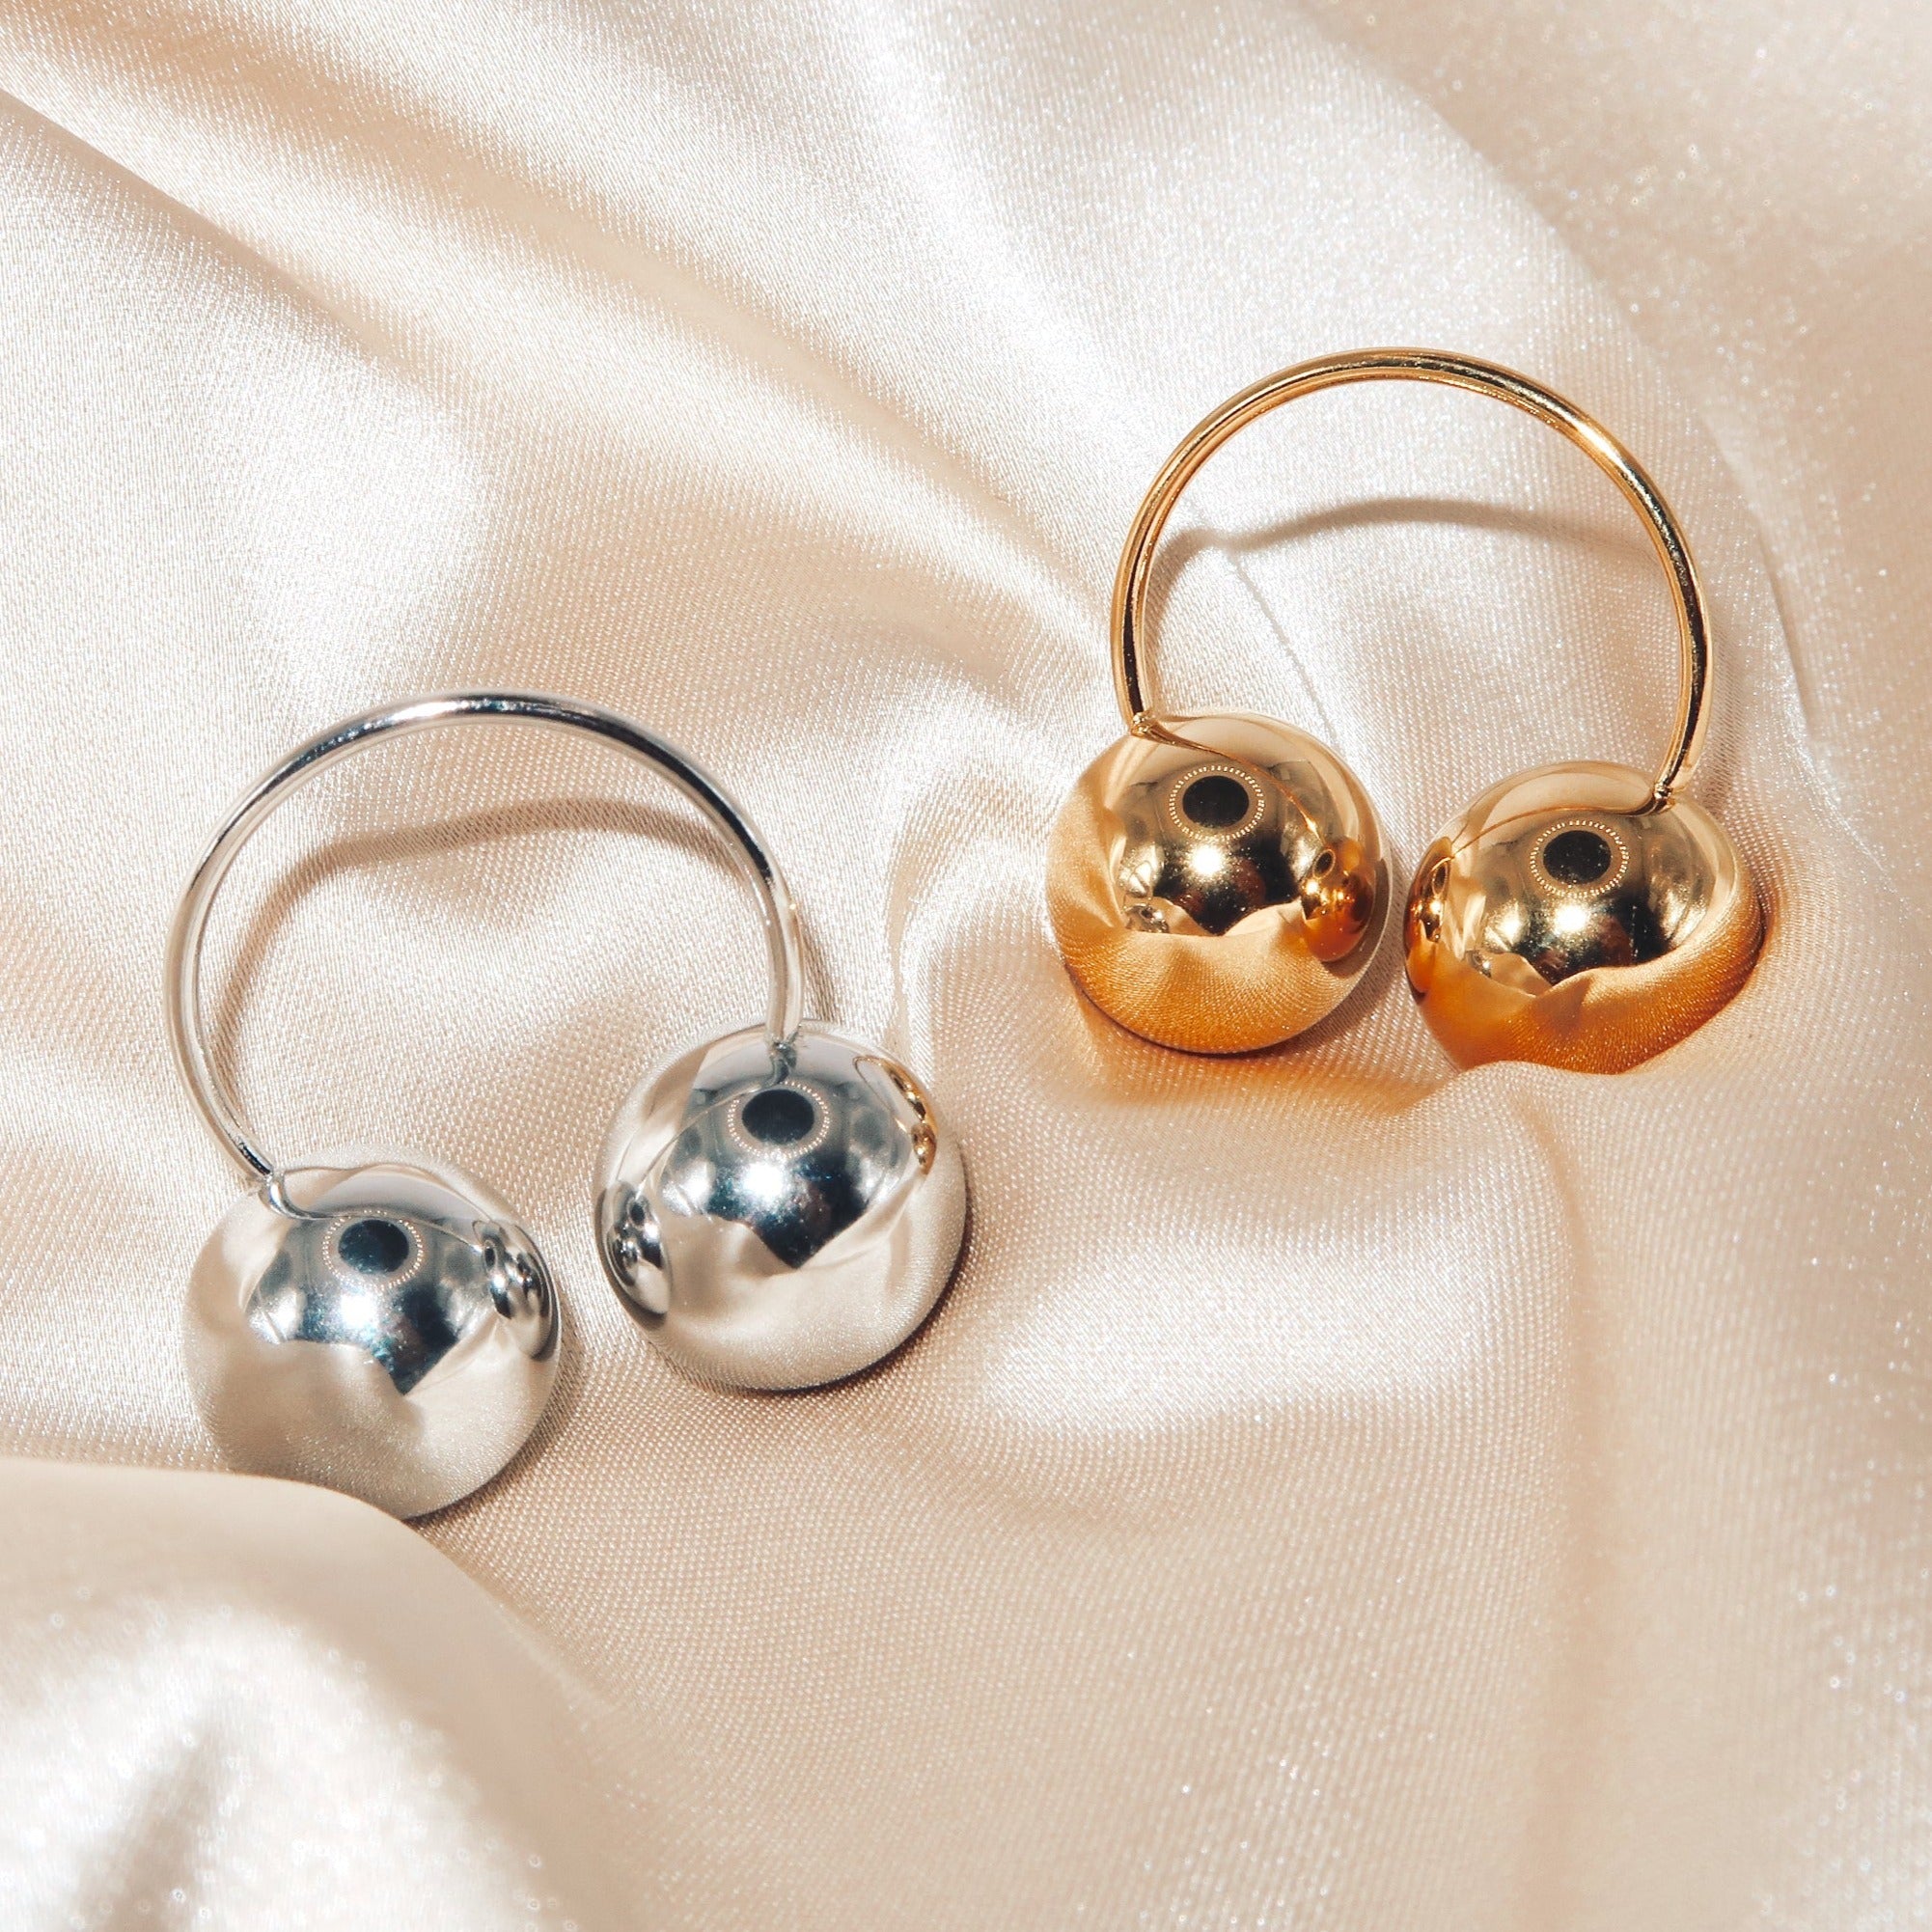 KAMALA - 18K PVD Gold Plated Double Sphere Ring - Mixed Metals